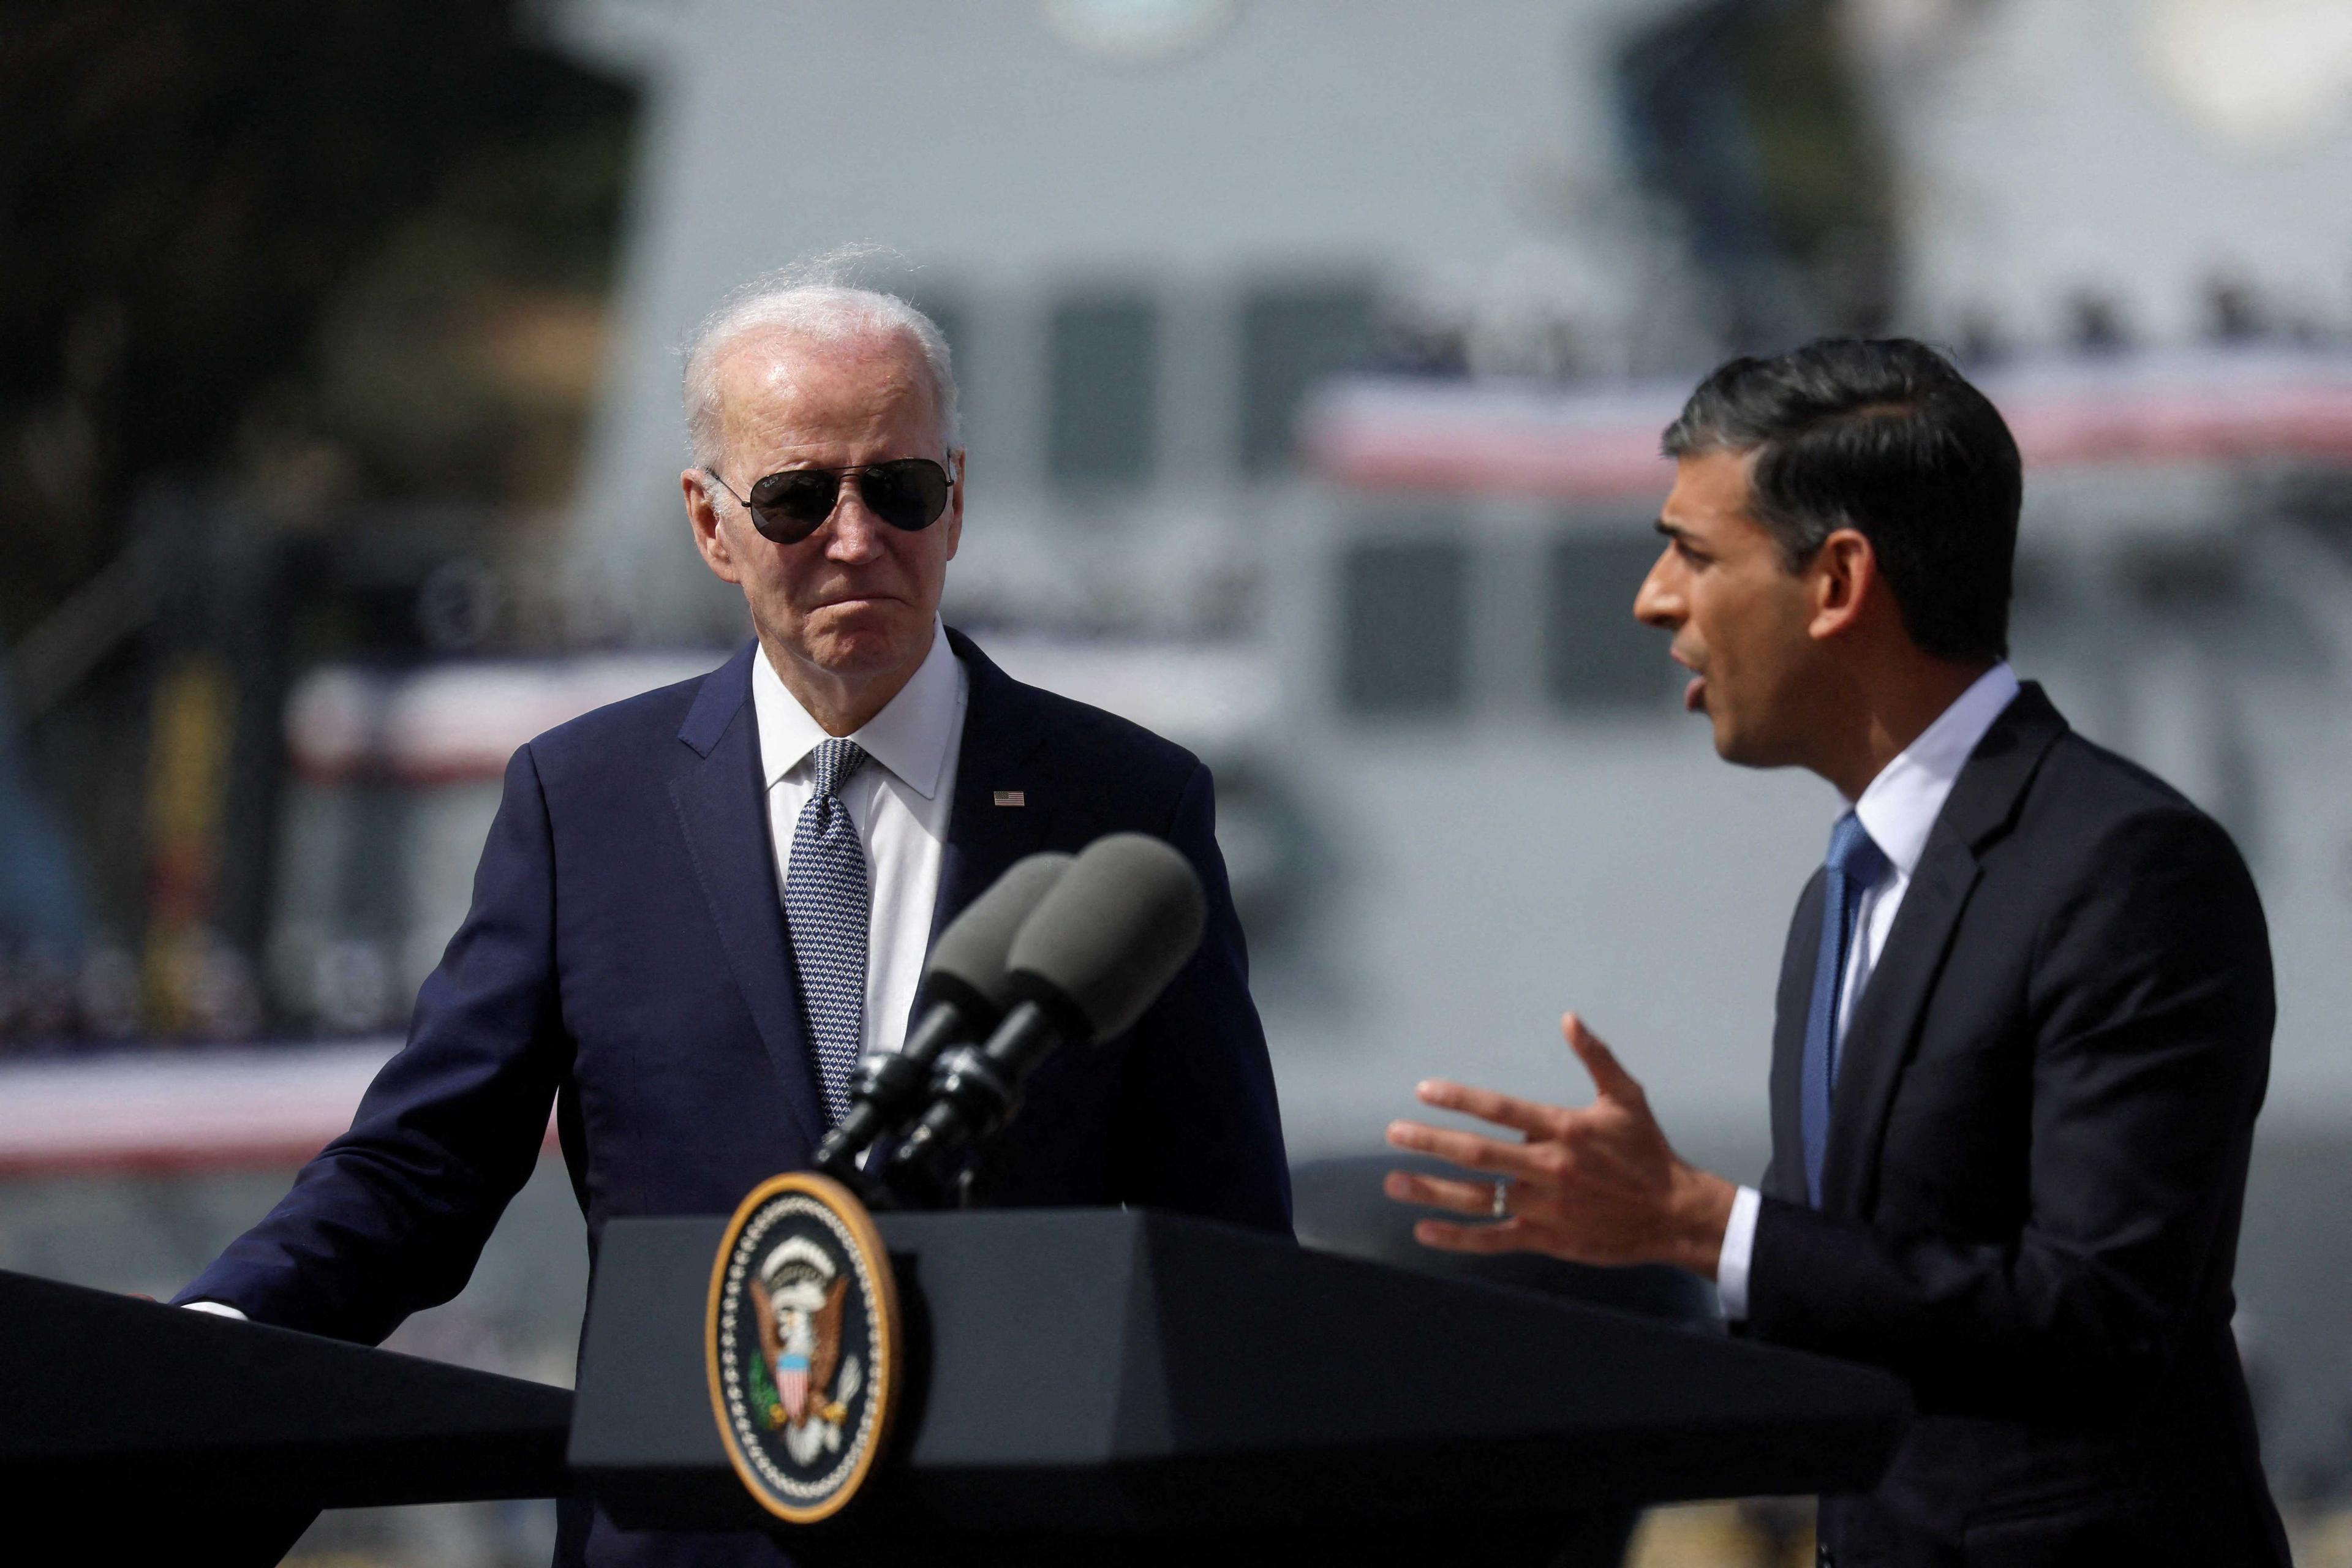 British Prime Minister Rishi Sunak delivers remarks on the Australia - United Kingdom - US (Aukus) partnership, after a trilateral meeting with US President Joe Biden and Australian Prime Minister Anthony Albanese, at Naval Base Point Loma in San Diego, California US March 13. Photo: Reuters